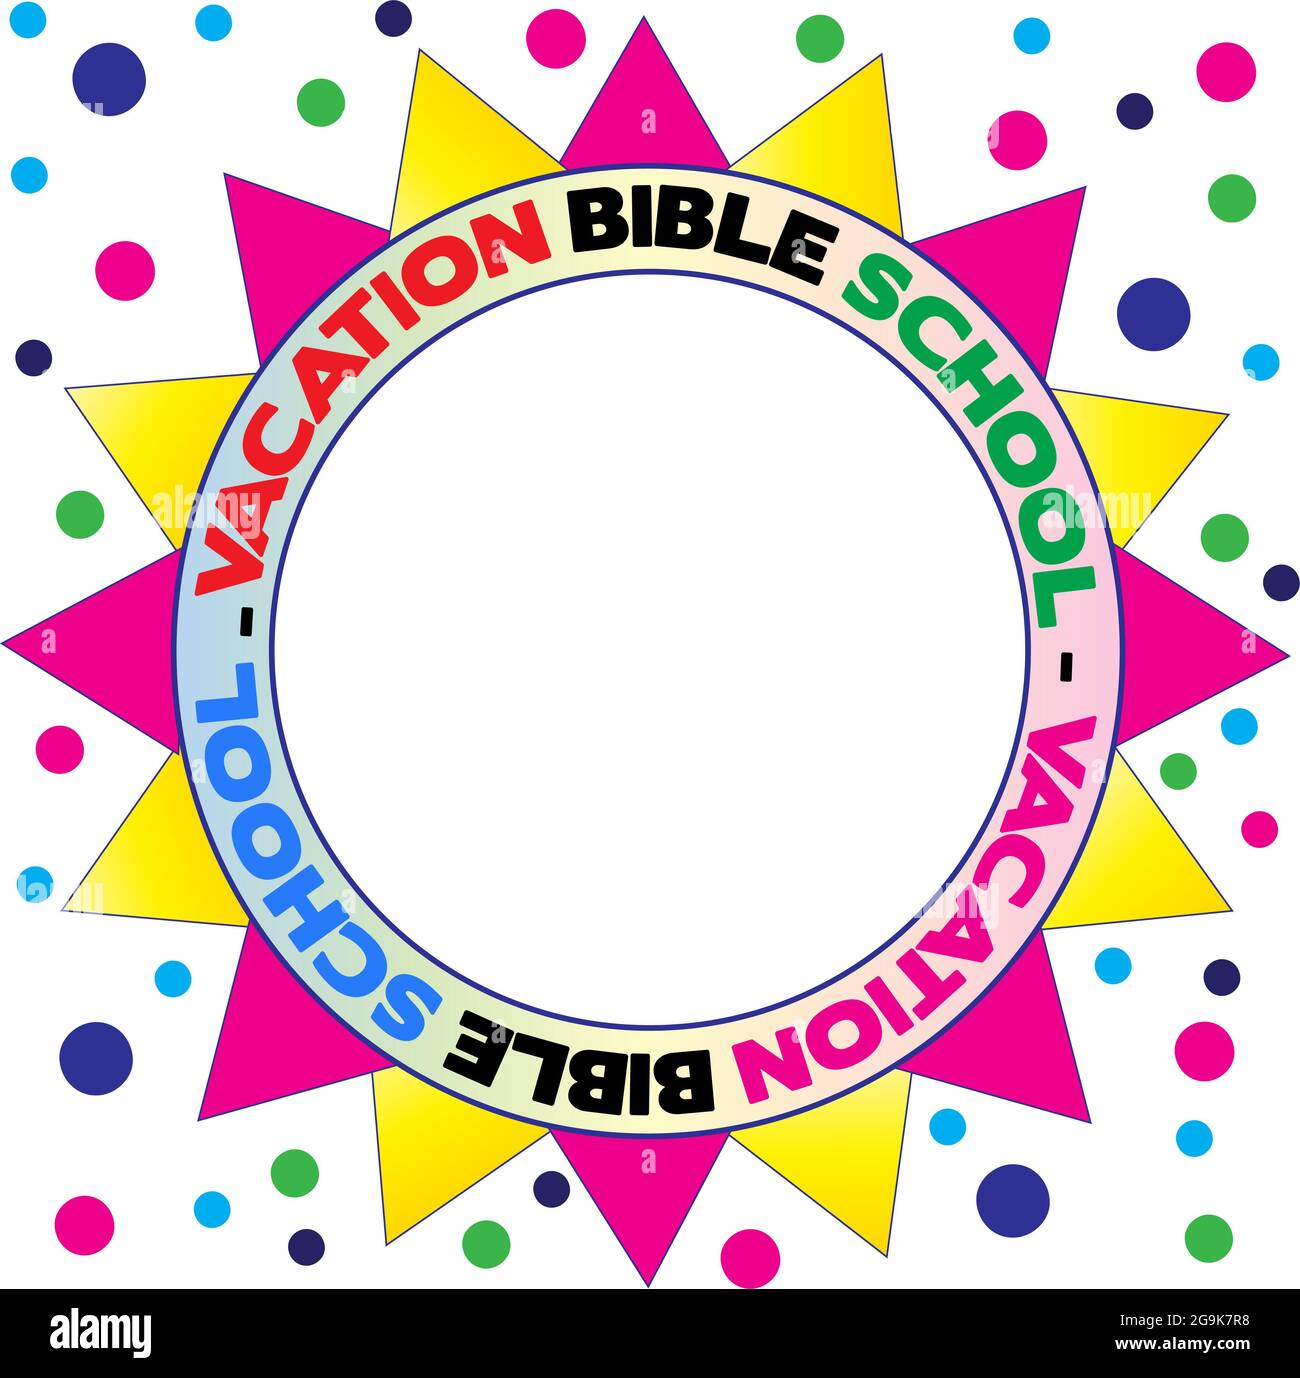 Vacation Bible Back Ground with Text around circle with decorative points,  Available Text Area in center of circle. Stock Photo